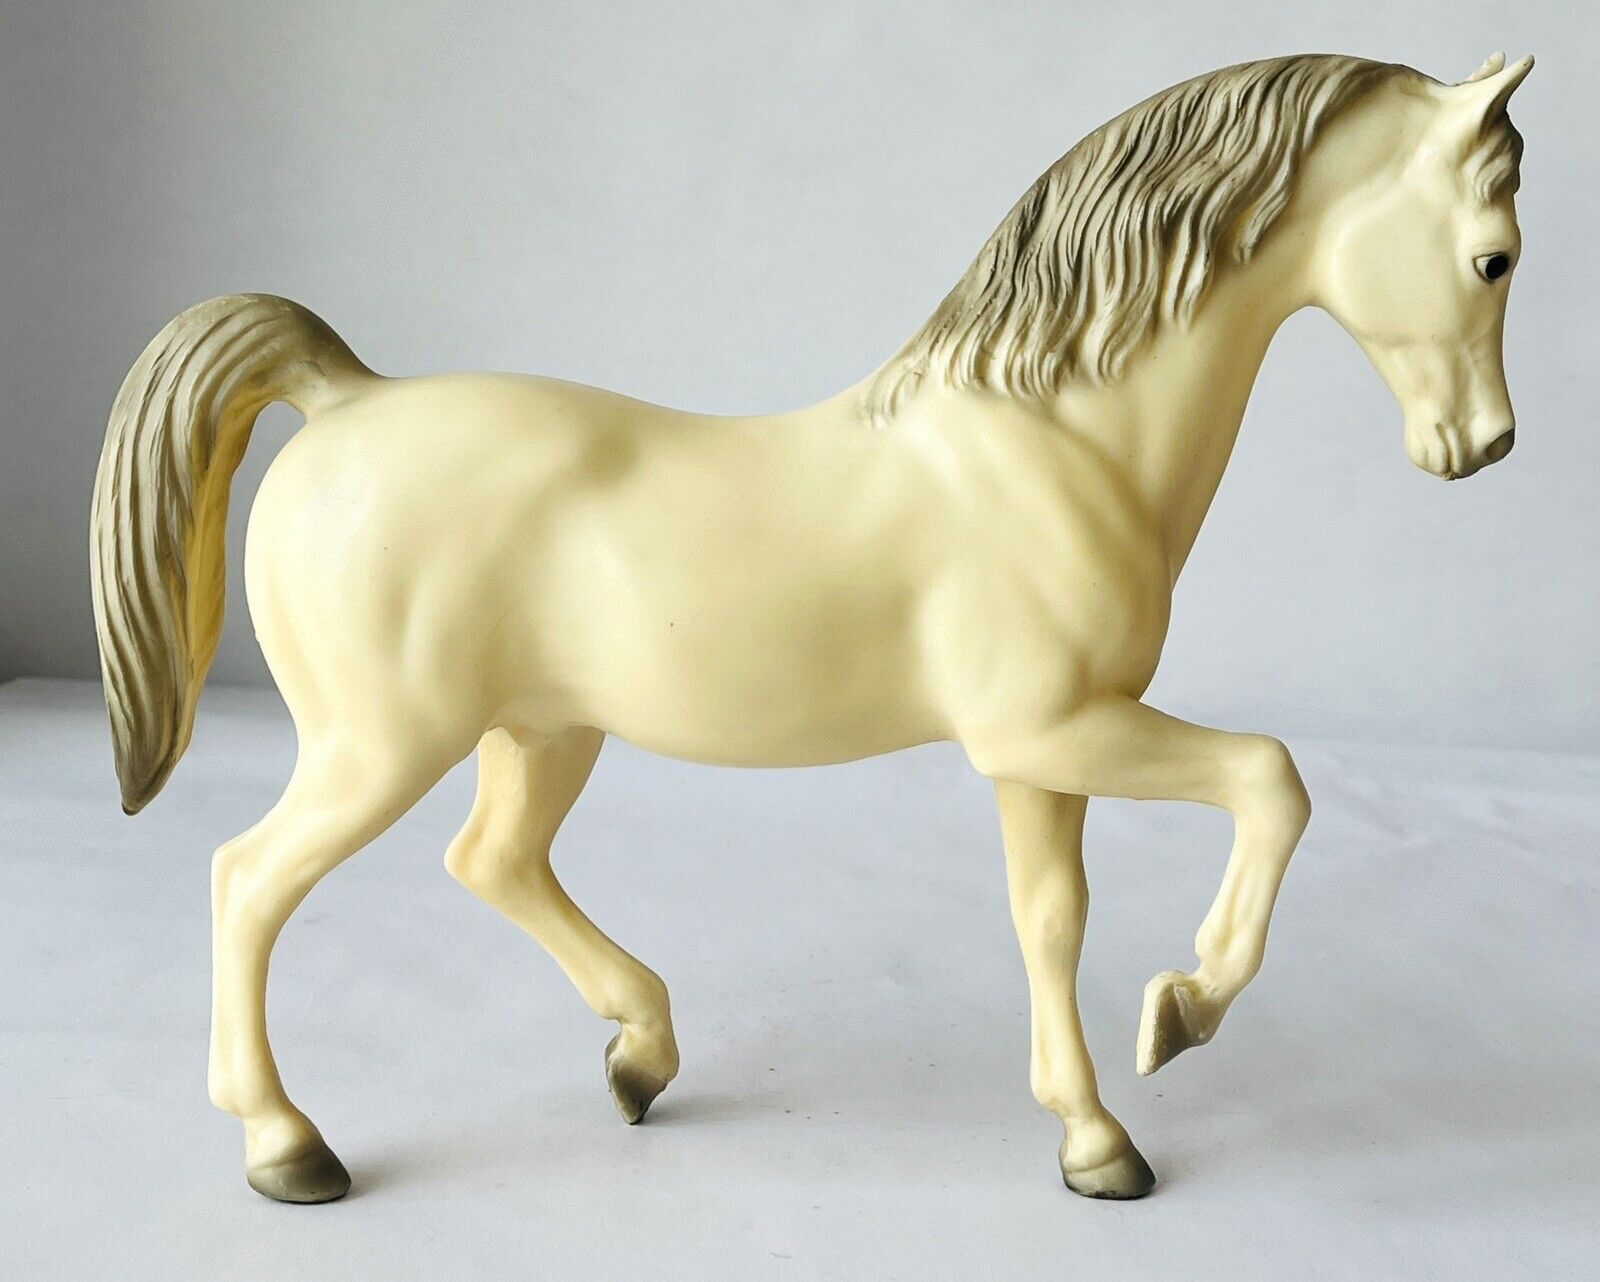 Primary image for Breyer Prince Arabian Stallion Model Horse Glossy Alabaster & Grey 1970 or later